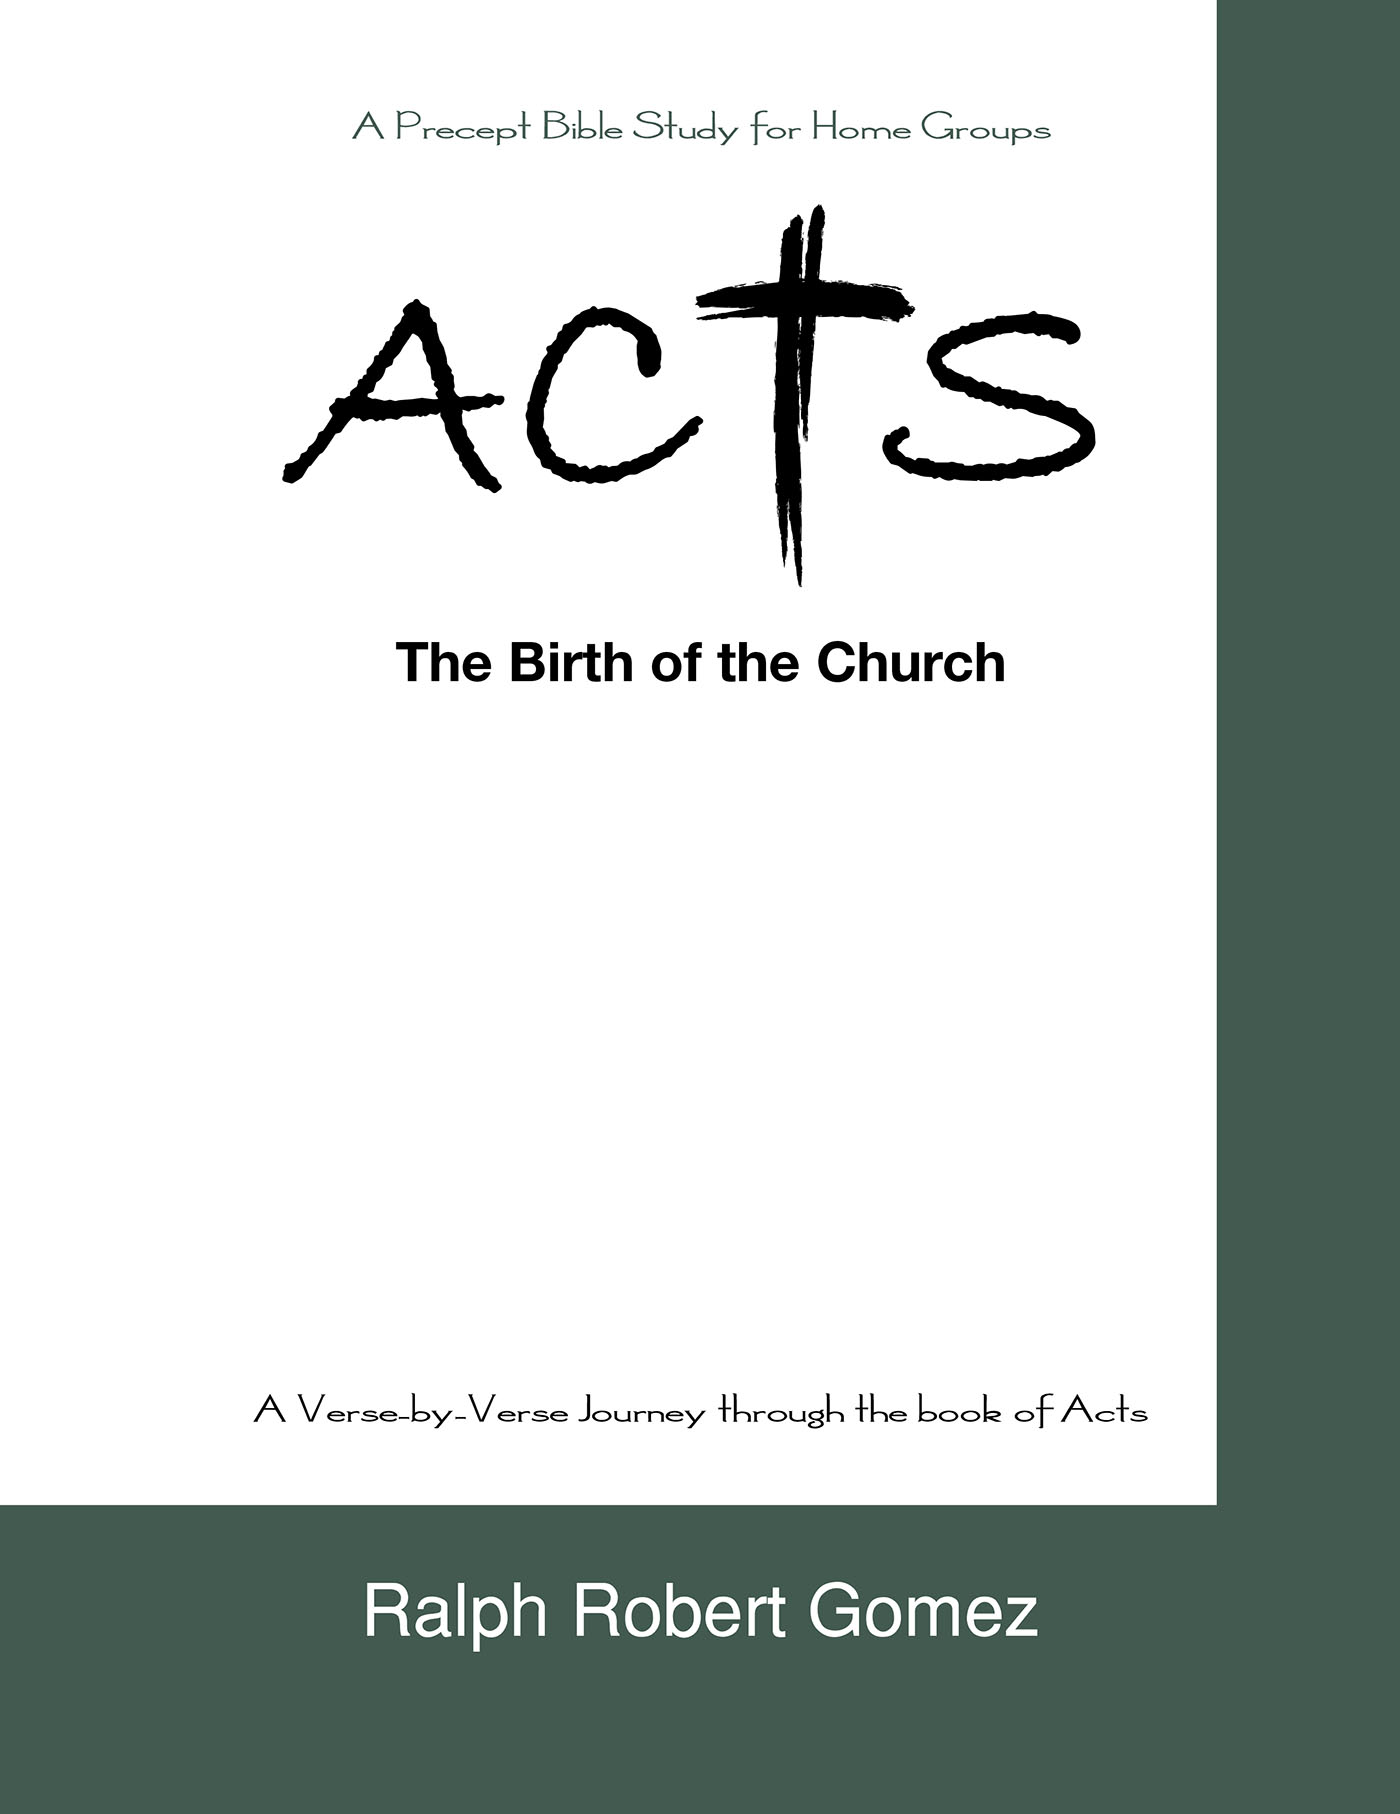 Ralph Robert Gomez’s New Book, "ACTS: The Birth of the Church," is a Comprehensive Precept Bible Study for Home Groups & is the First of Three Studies on the Book of Acts